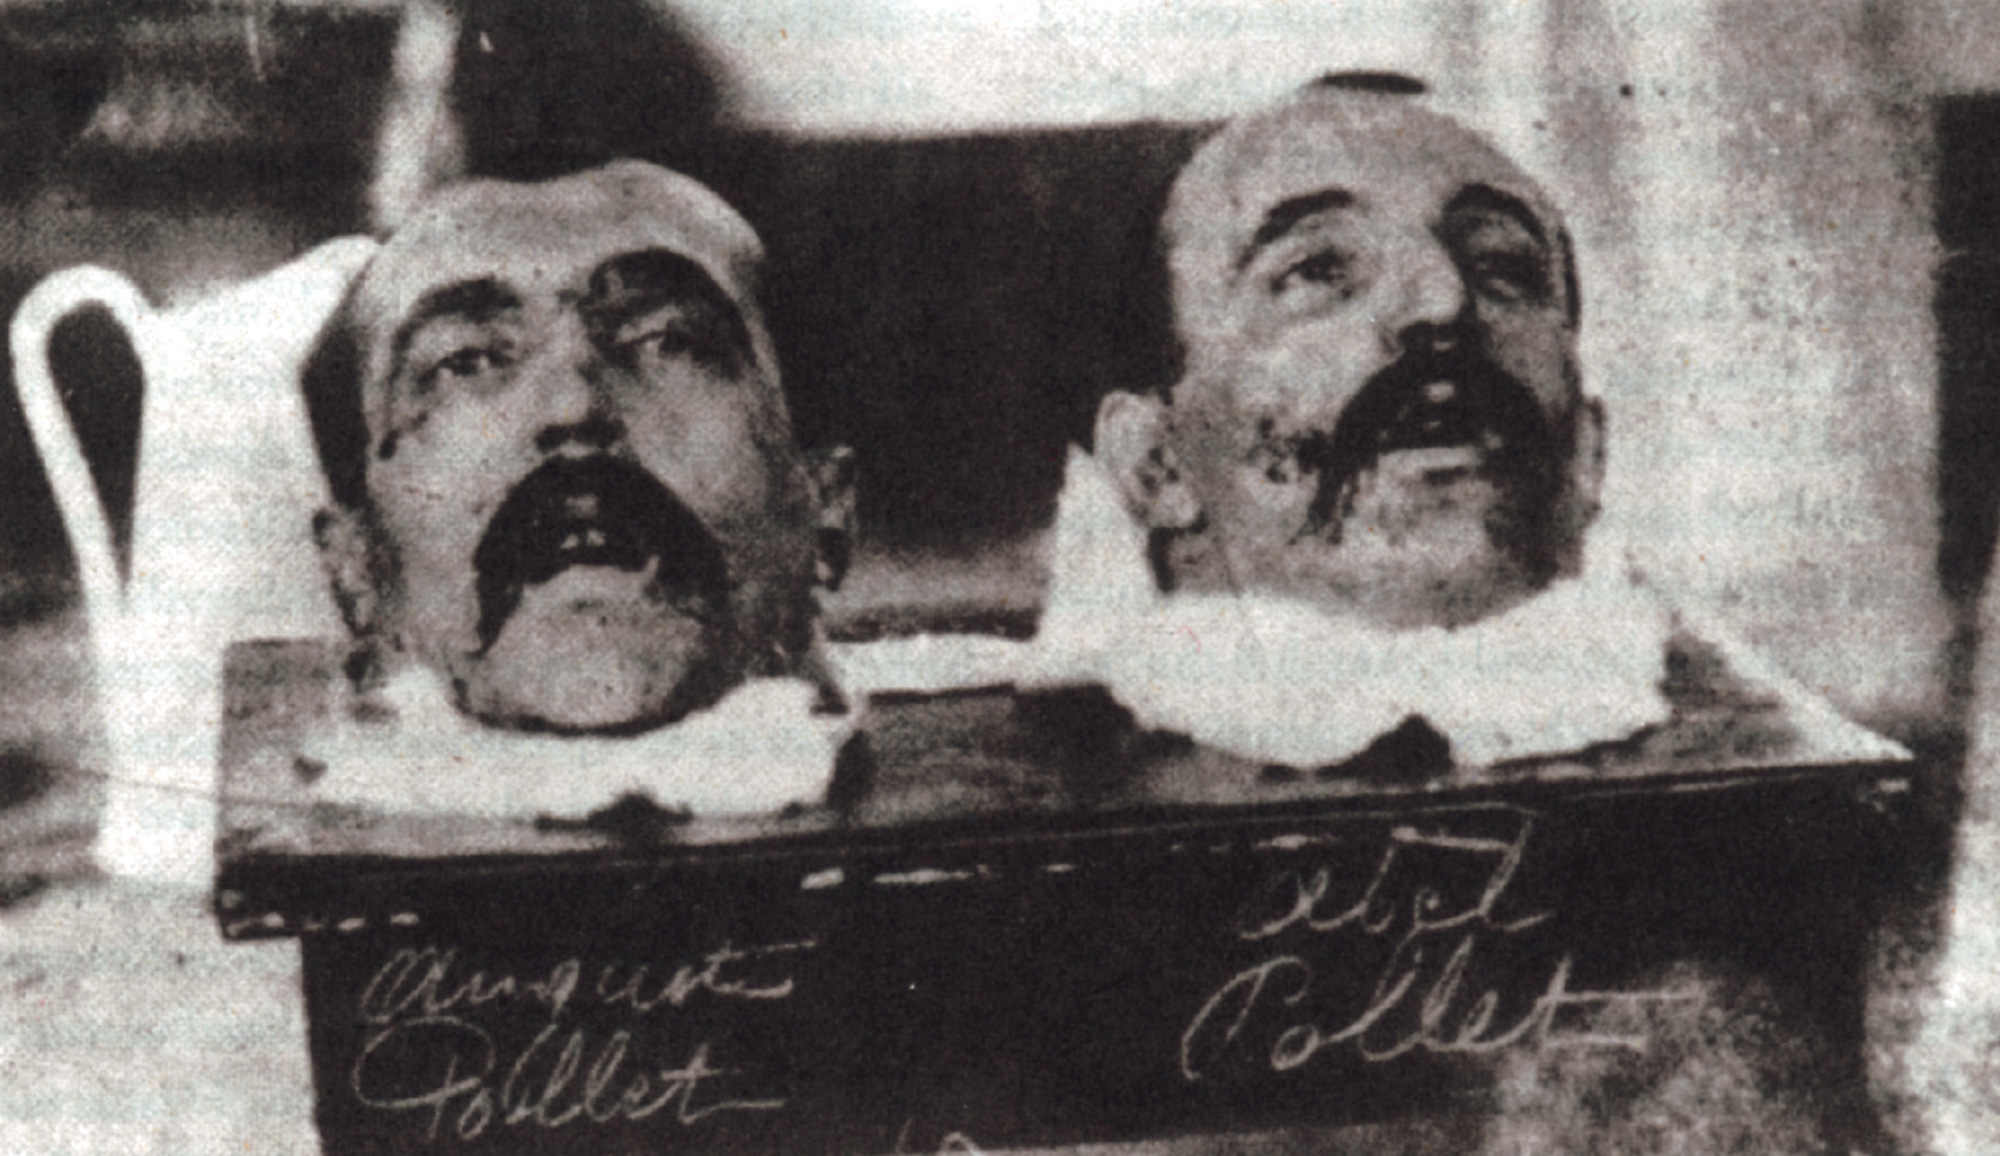 The severed heads of convicted armed robbers and twin brothers Auguste and Abel Pollet, guillotined on 11 January 1909.